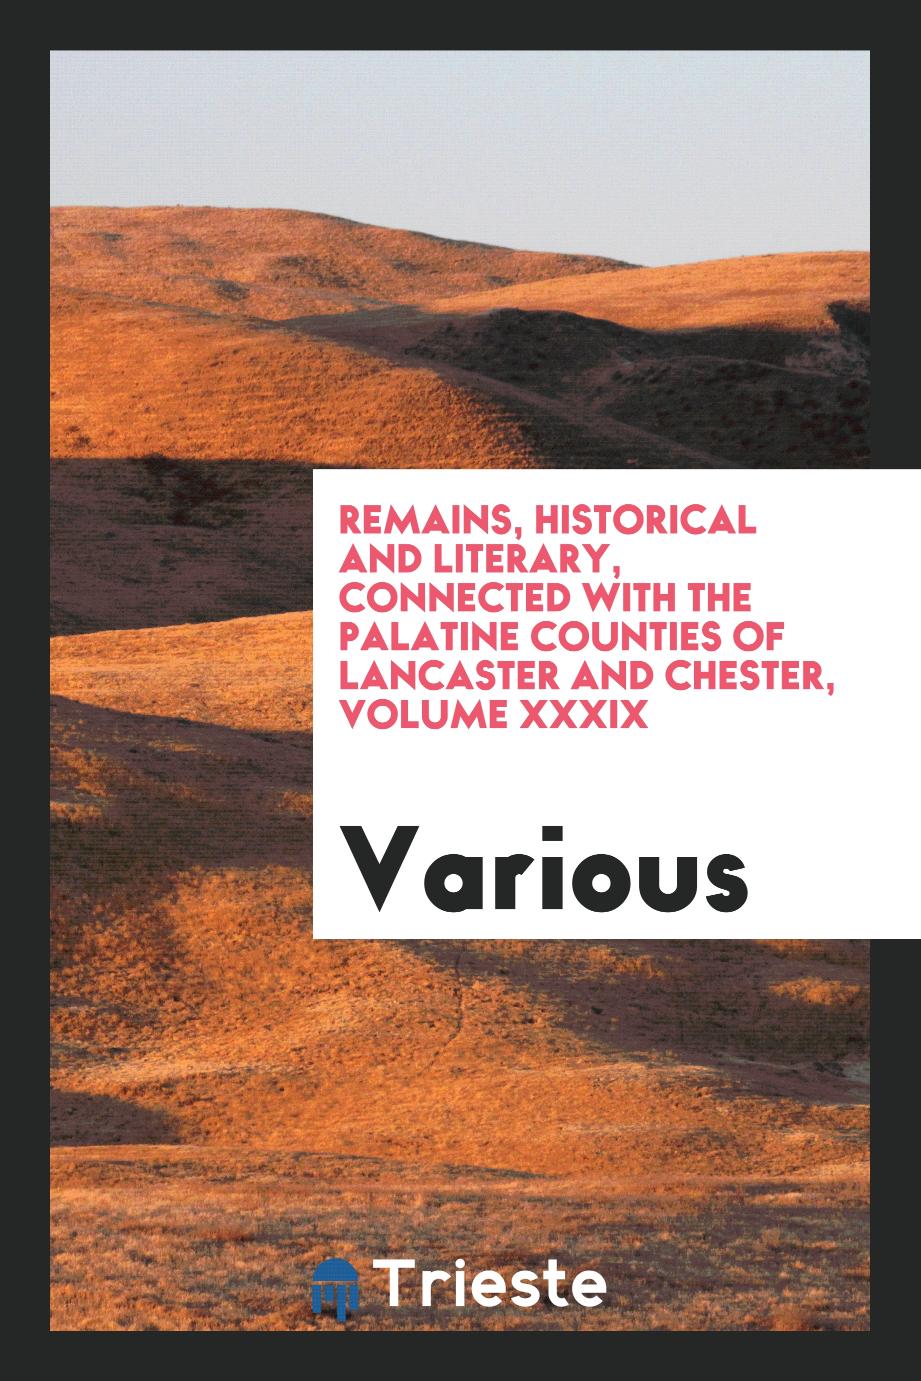 Remains, Historical and Literary, Connected with the Palatine Counties of Lancaster and Chester, Volume XXXIX